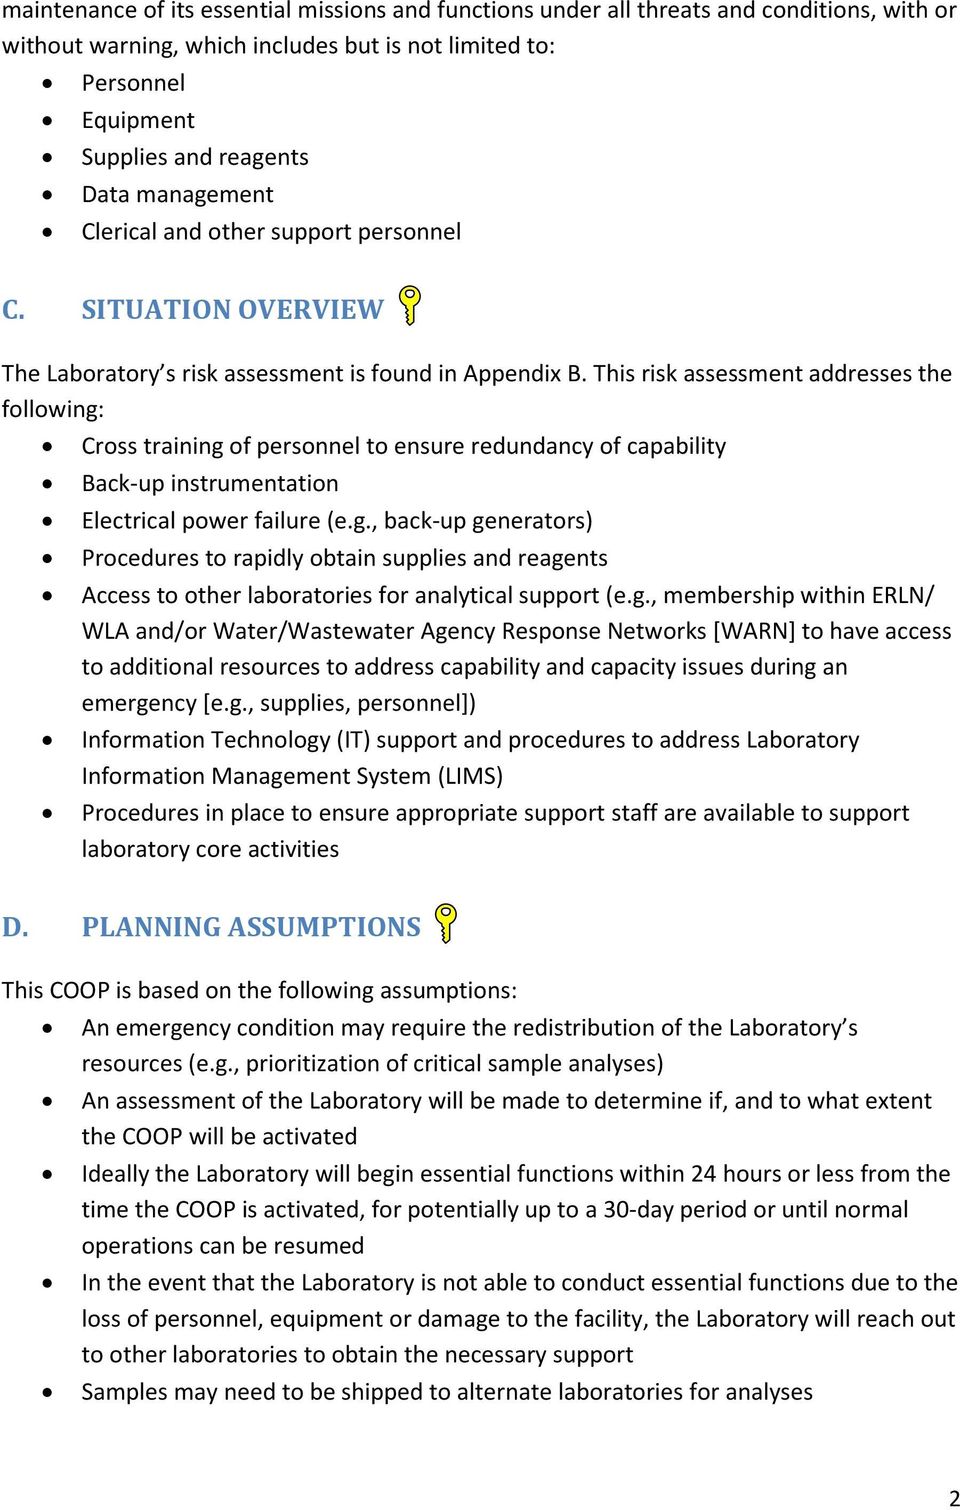 This risk assessment addresses the following: Cross training of personnel to ensure redundancy of capability Back-up instrumentation Electrical power failure (e.g., back-up generators) Procedures to rapidly obtain supplies and reagents Access to other laboratories for analytical support (e.